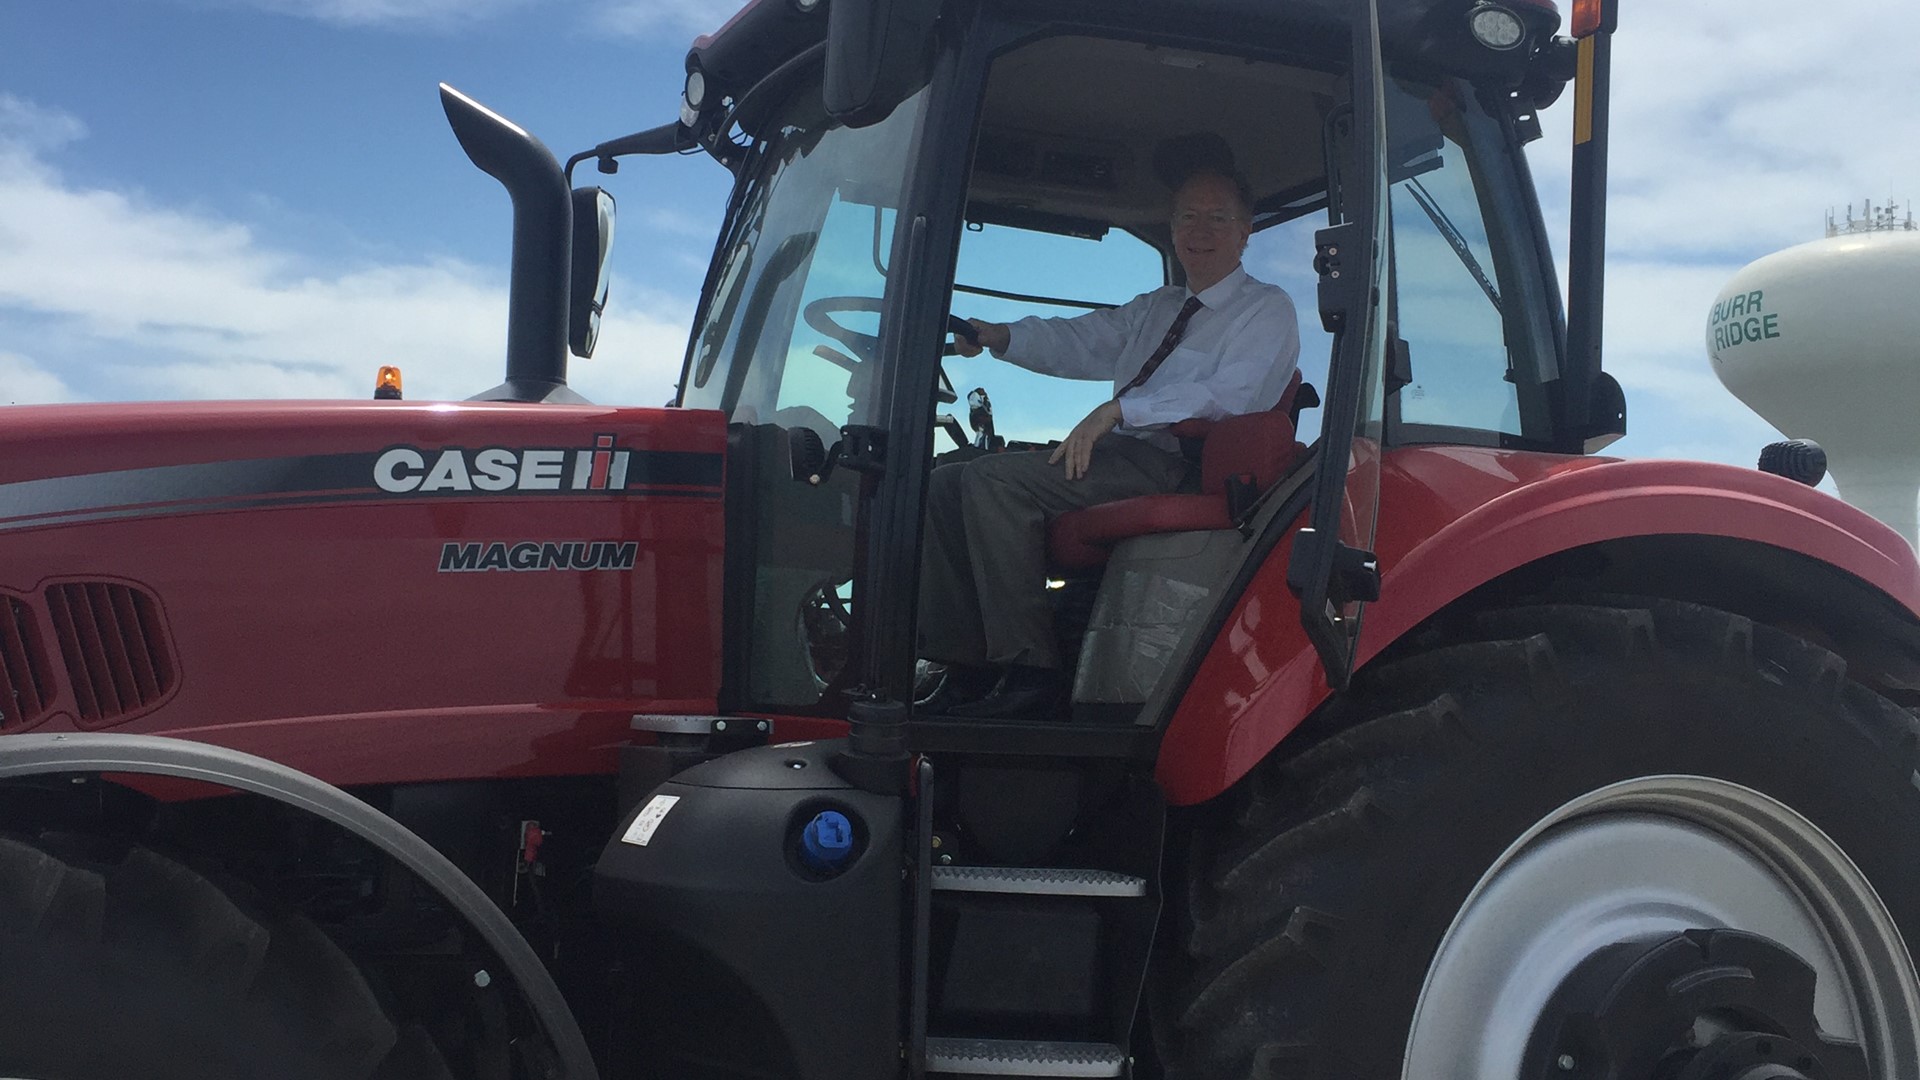 Congressman Bill Foster poses in a Case Ih Magnum tractor during visit to CNH Industrial Burr Ridge